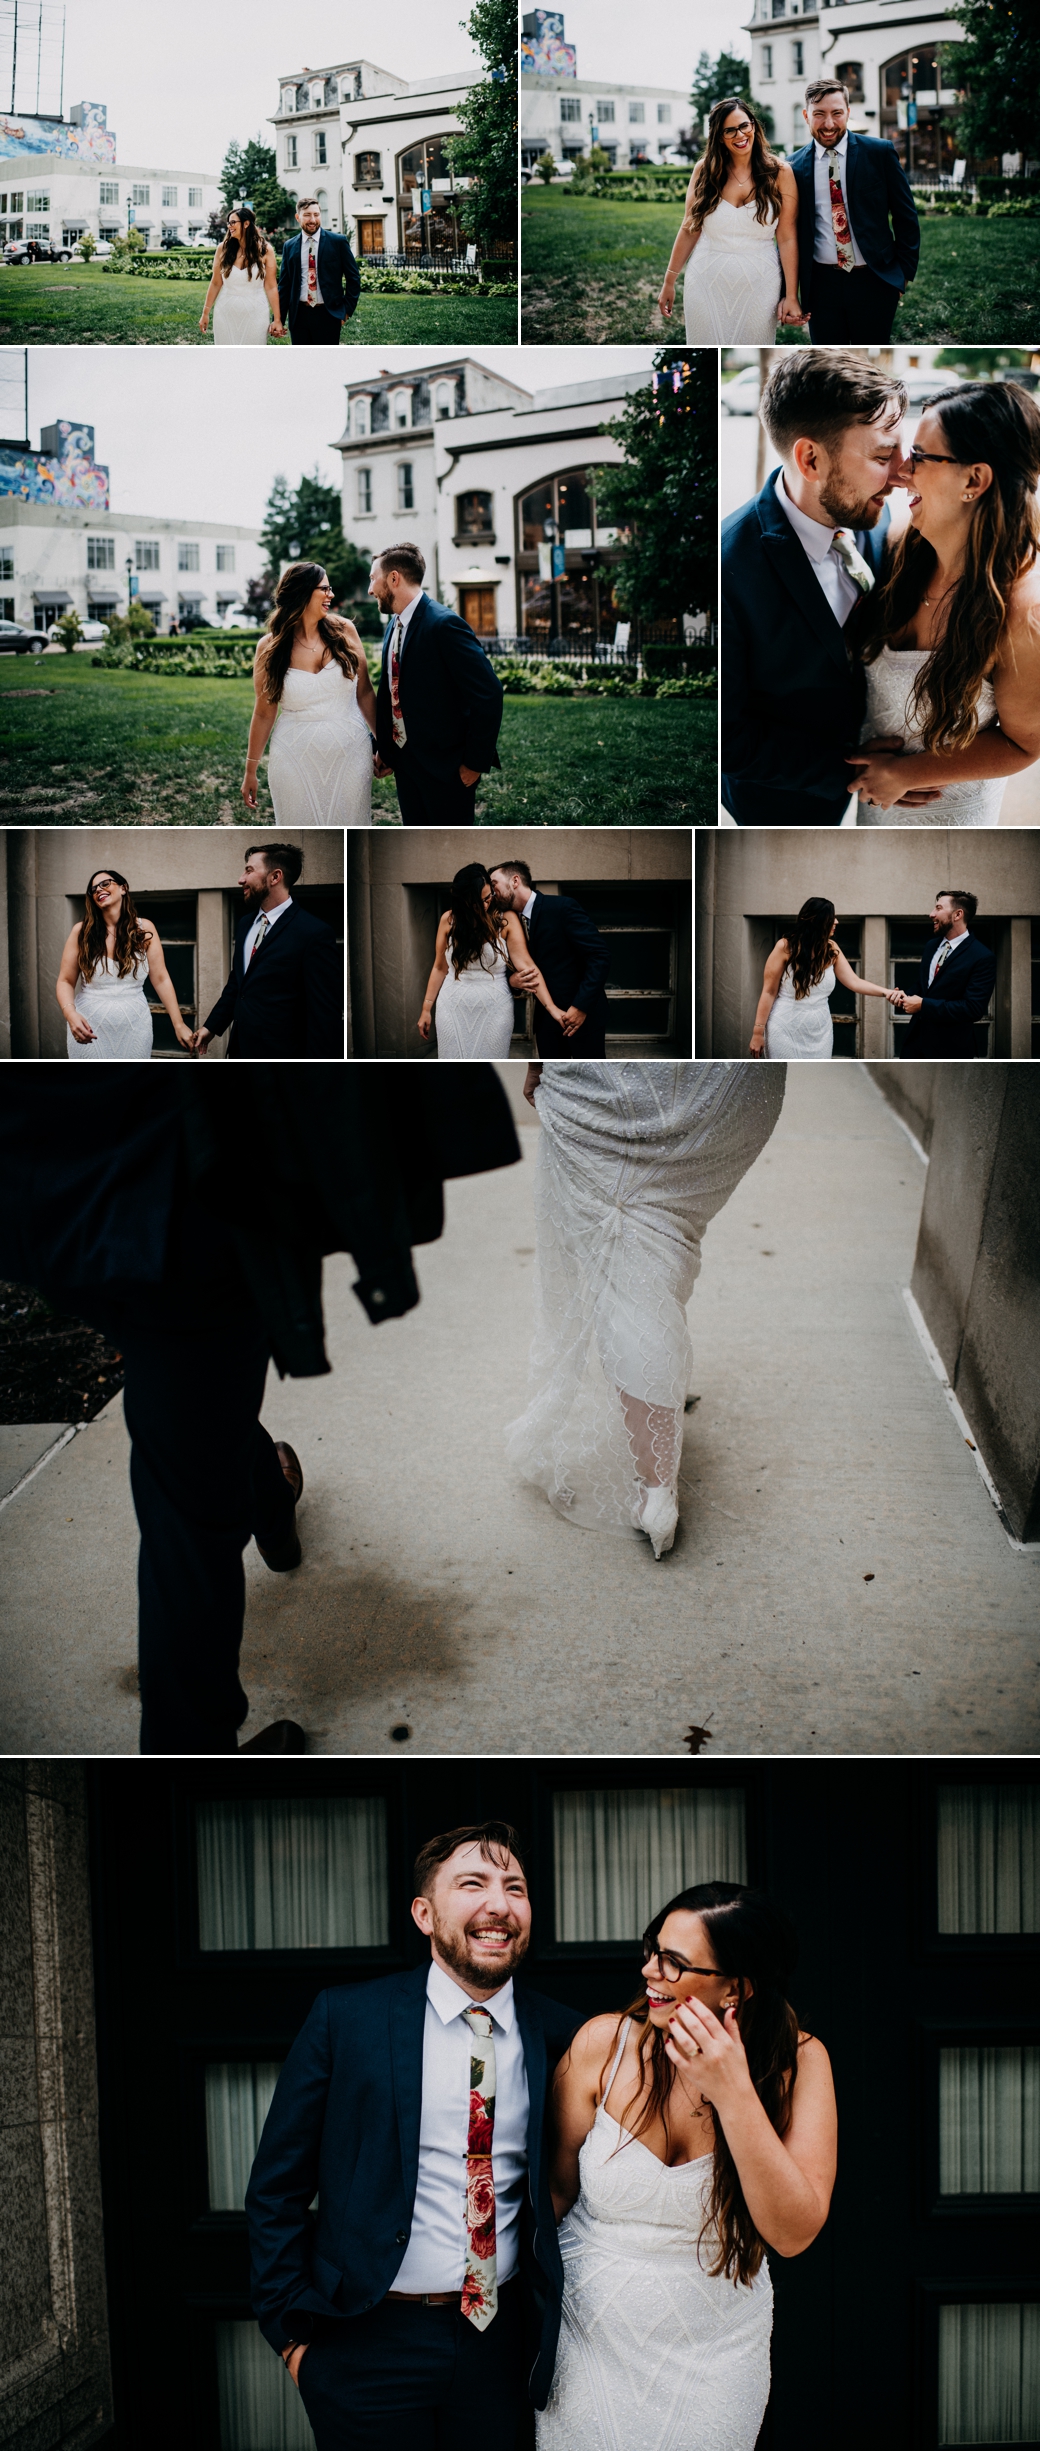 collage of candid, playful photos of a bride and groom walking through the grand arts district in St. Louis, MO during their rainy wedding day photo session